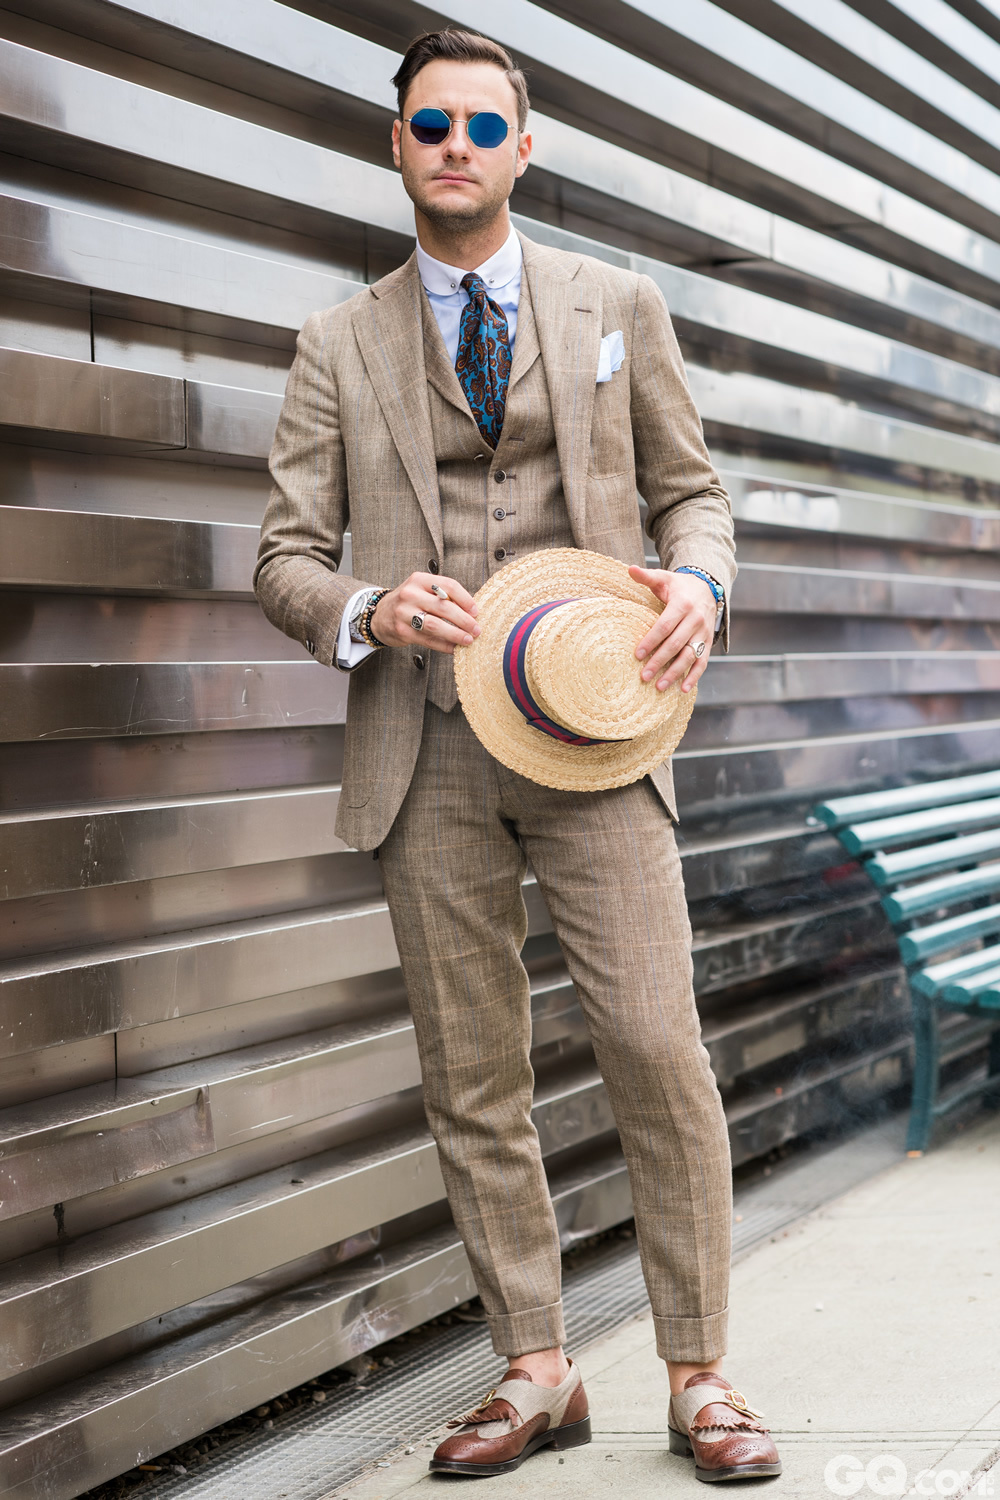 Federico
Sunglasses: Viver
Tie: vintage (from my grand father)
Shirt: Made to measure
Suit: Suit Supply
Hat and shoes: vintage

Inspiration: The classic gentleman with a twist, mostly the French actors in the 1930/1940s
（经典绅士感觉，3、40年代法国男演员即视感）